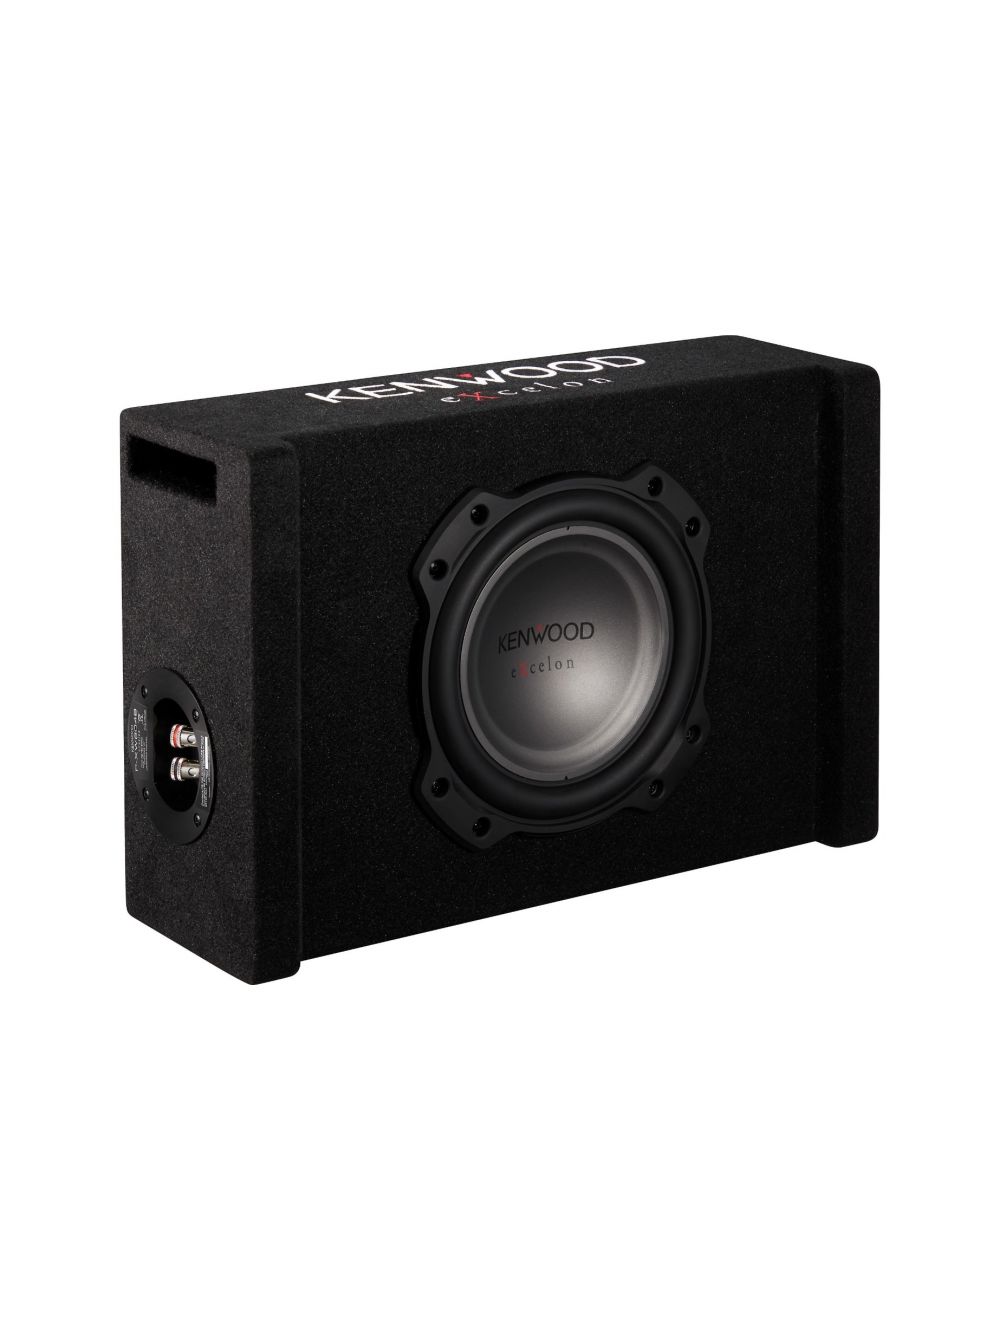 Kenwood P-W804B Enclosure with one 8" Shallow Mount Subwoofer